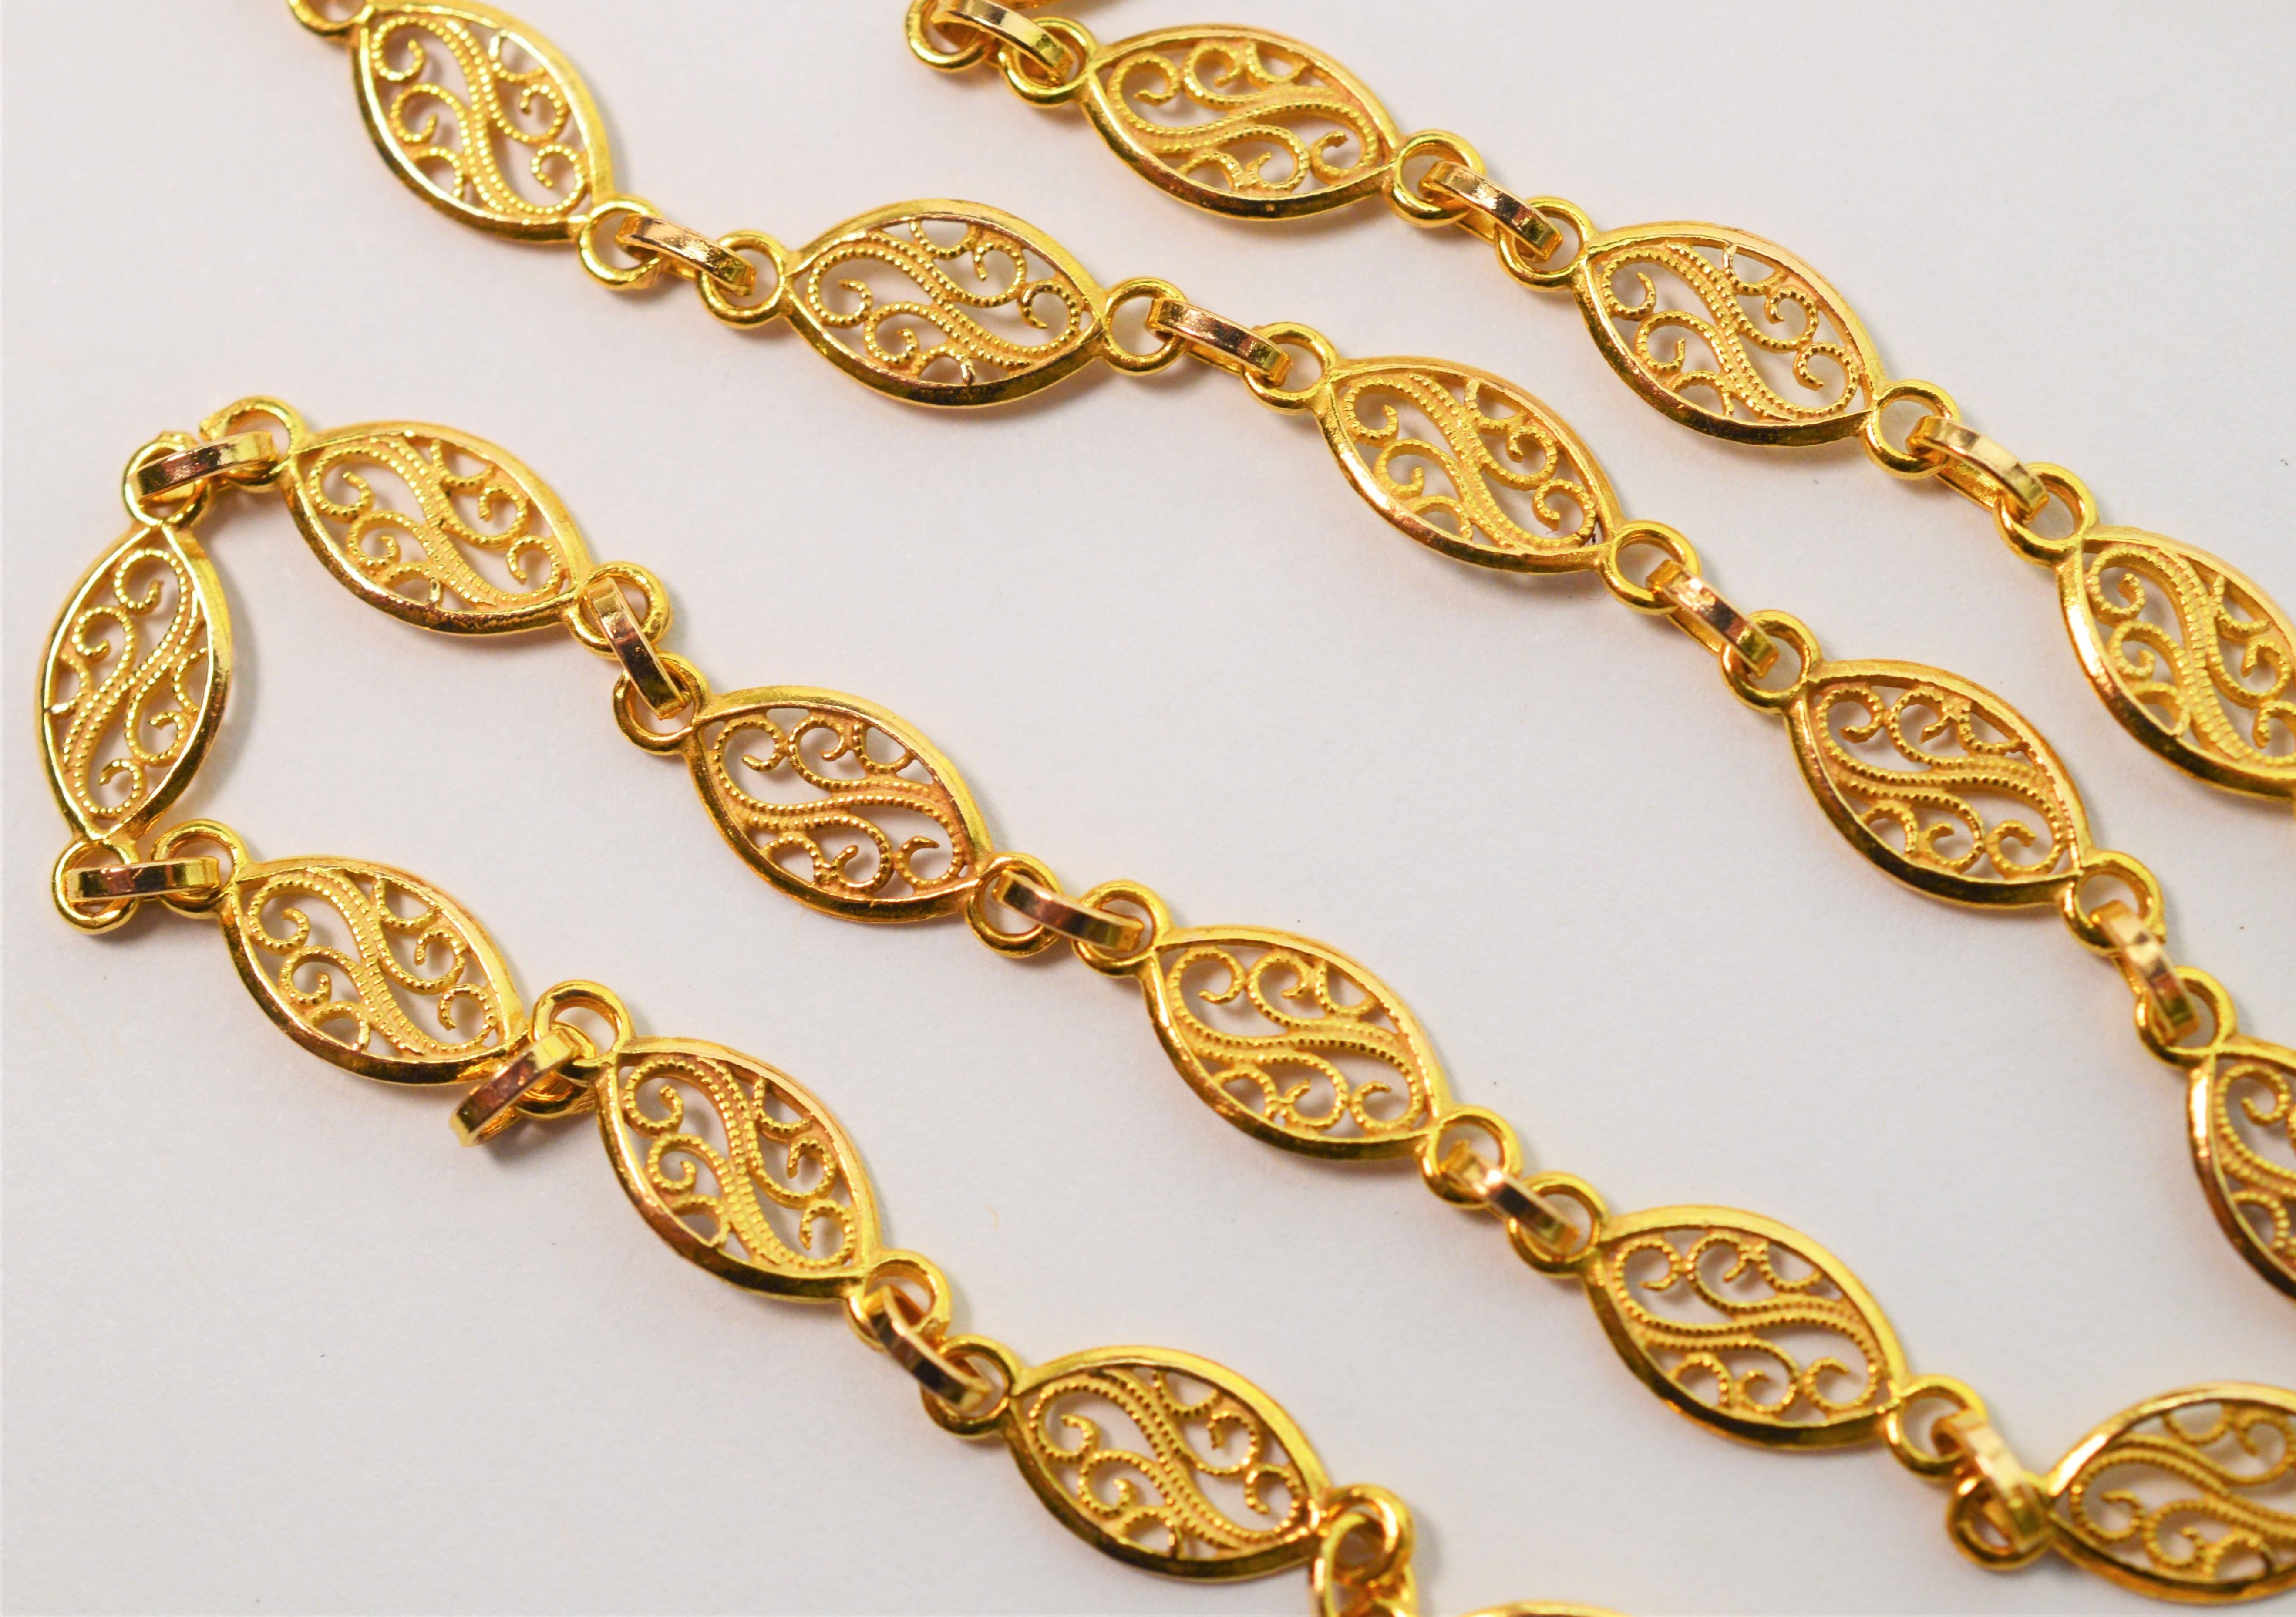 Italian made and in bright fourteen karat 14K yellow, this pretty fancy filigree flat link chain is 24 inches in length and finished with a lobster clasp. The width of the oval links are approximately 5mm. Gift Boxed.